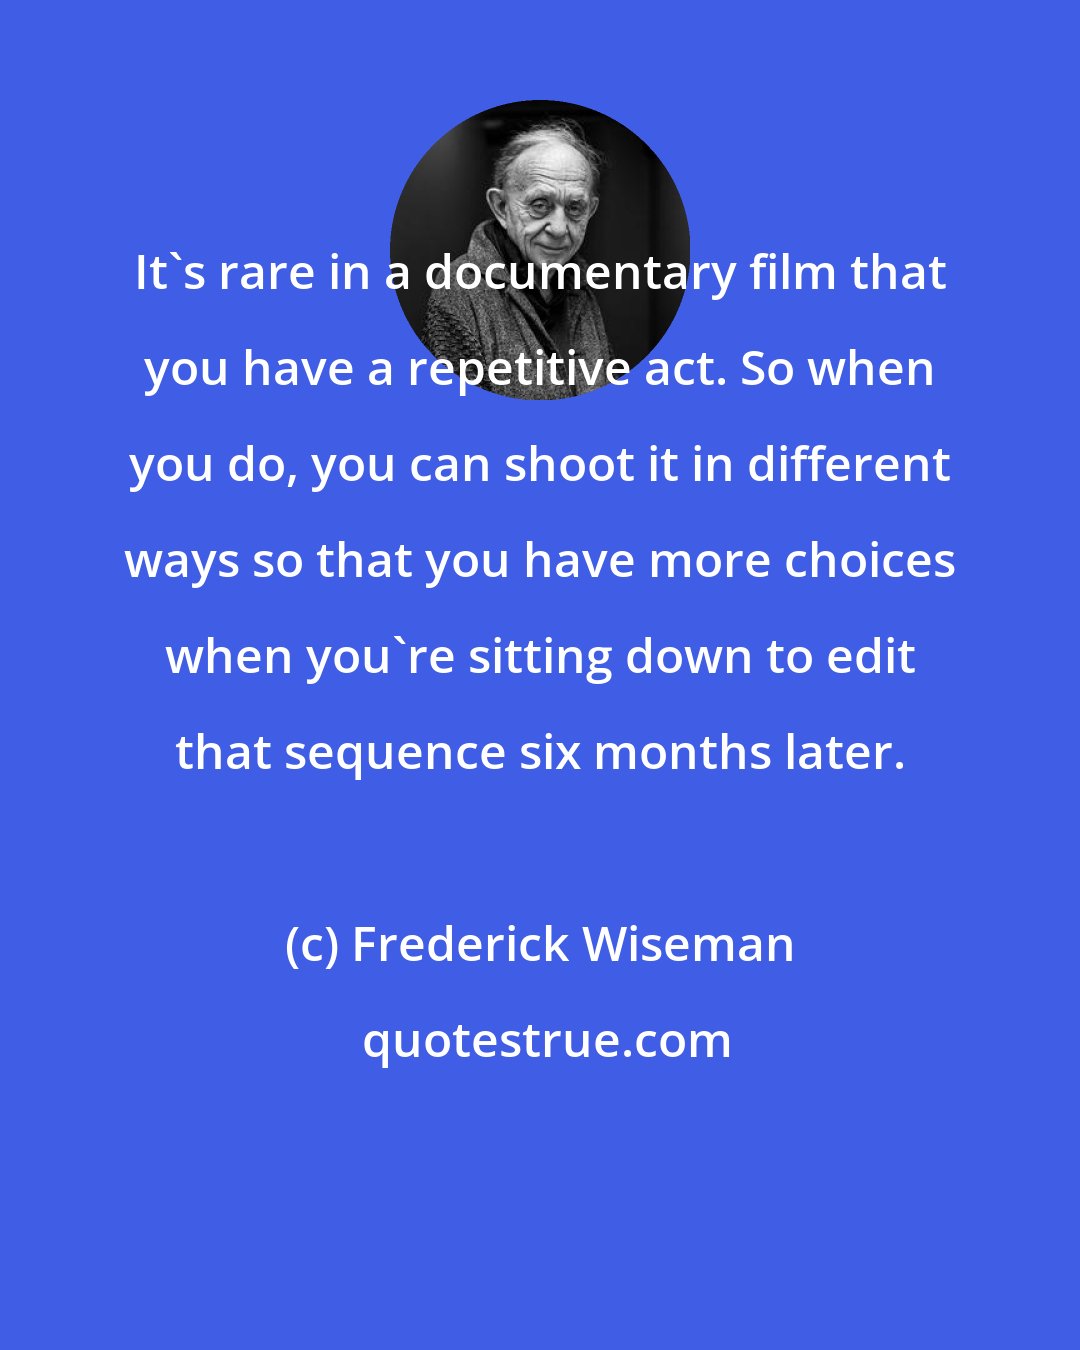 Frederick Wiseman: It's rare in a documentary film that you have a repetitive act. So when you do, you can shoot it in different ways so that you have more choices when you're sitting down to edit that sequence six months later.